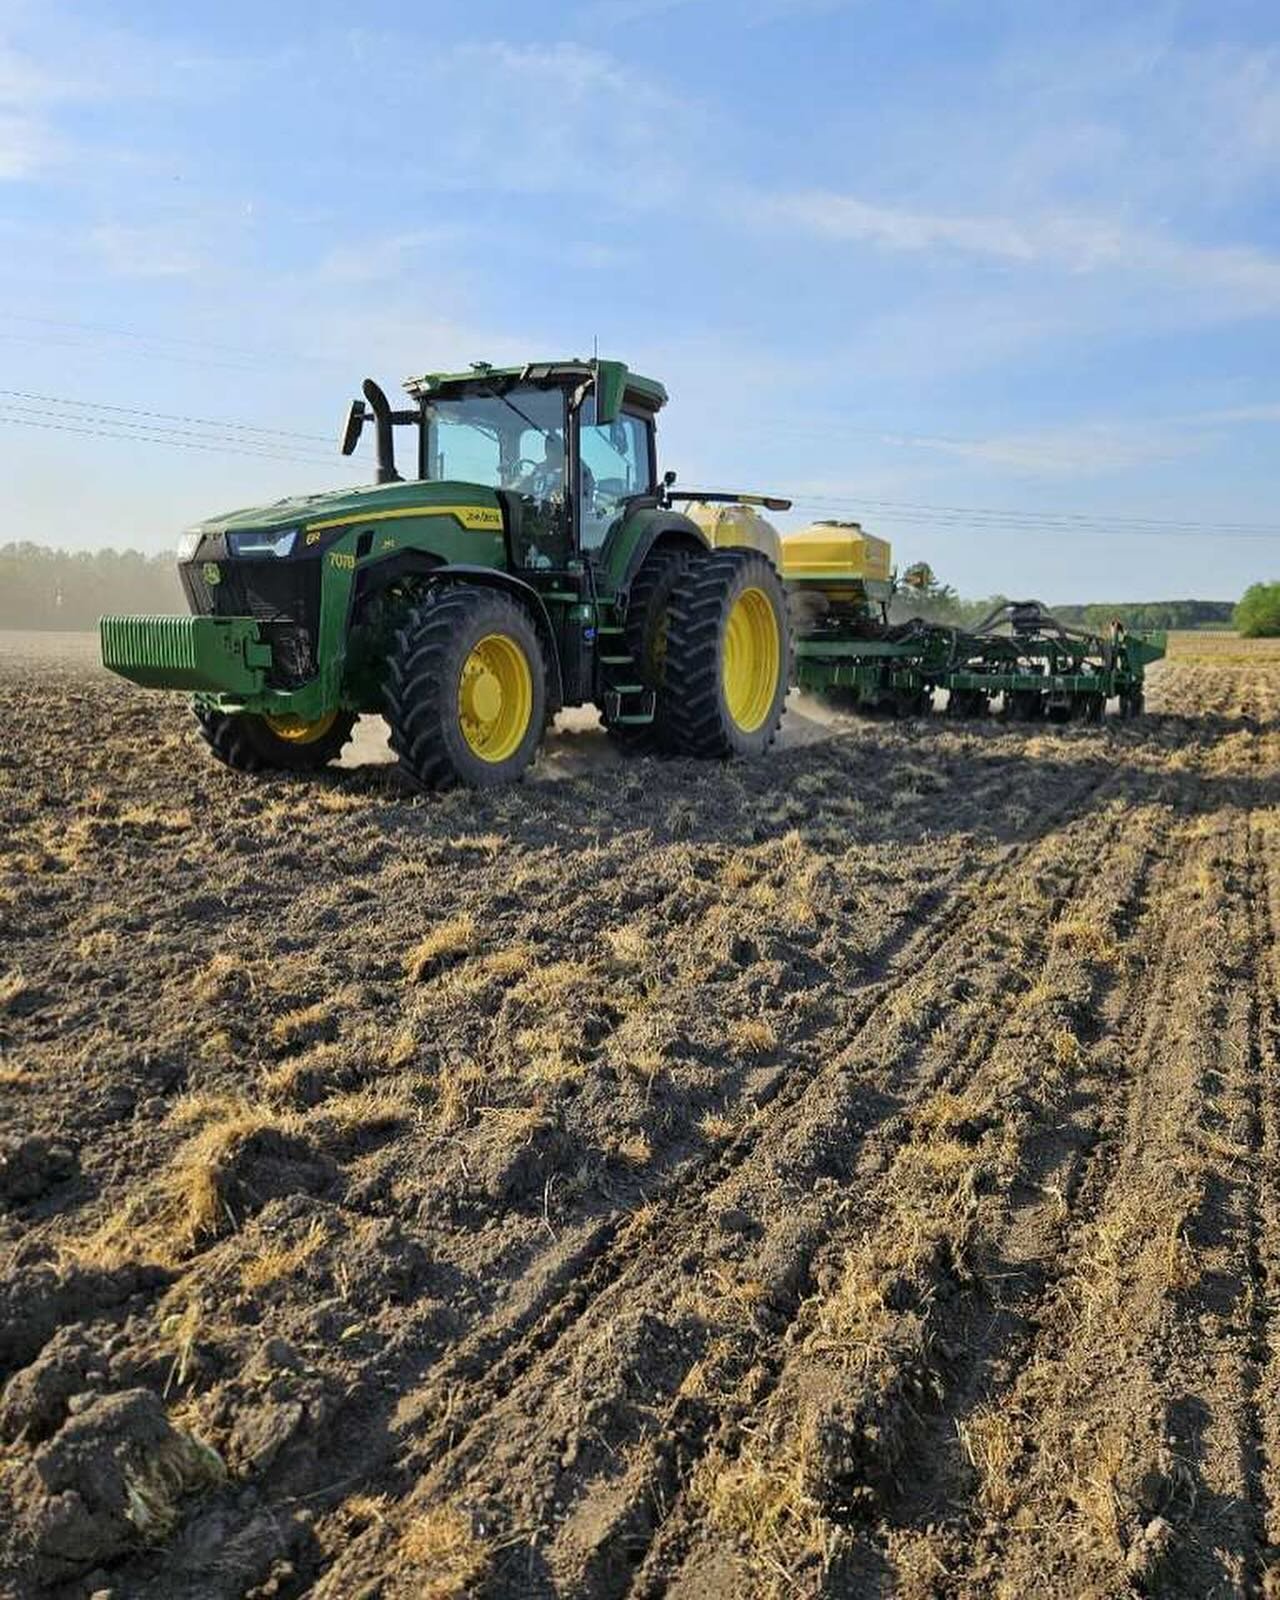 We were lucky to get some sunny days in the field this week! Can you guess what we&rsquo;re planting?

#agriculture #farm #gottobenc #sustainableagriculture #johndeere #farming